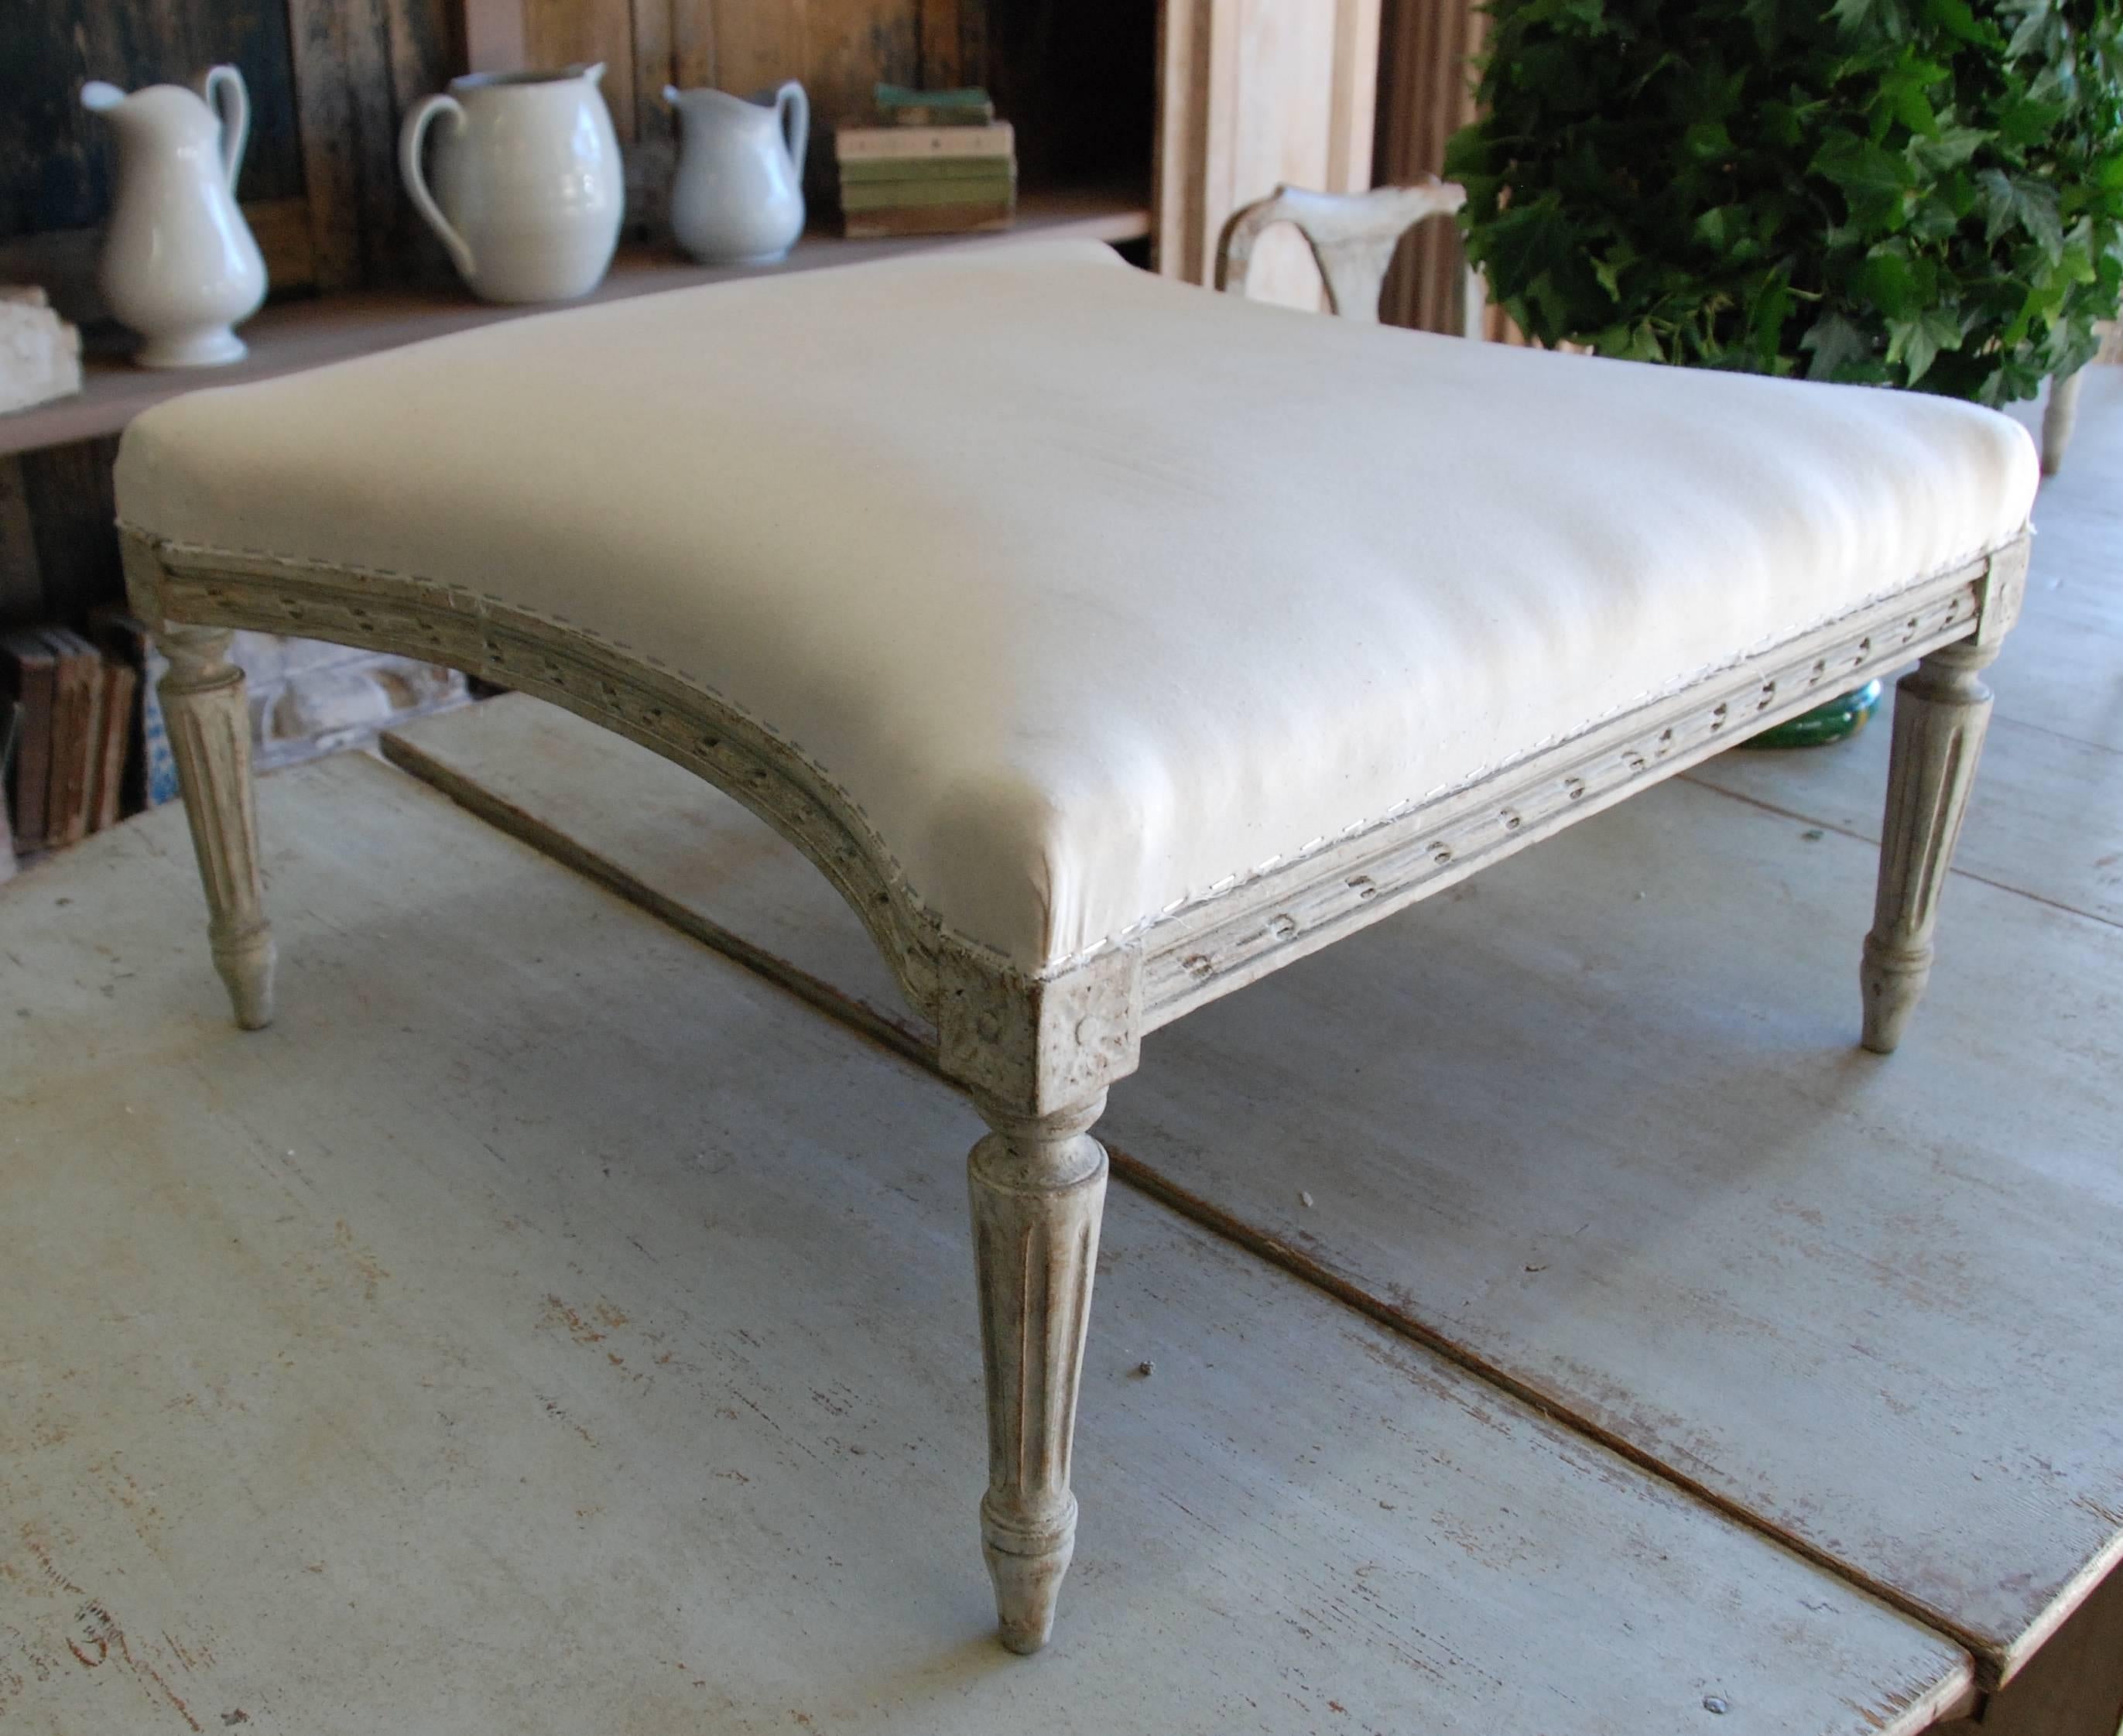 19th century Swedish tapered footstool scraped down to original cream color. Lovely hand-carved apron and fluted legs.